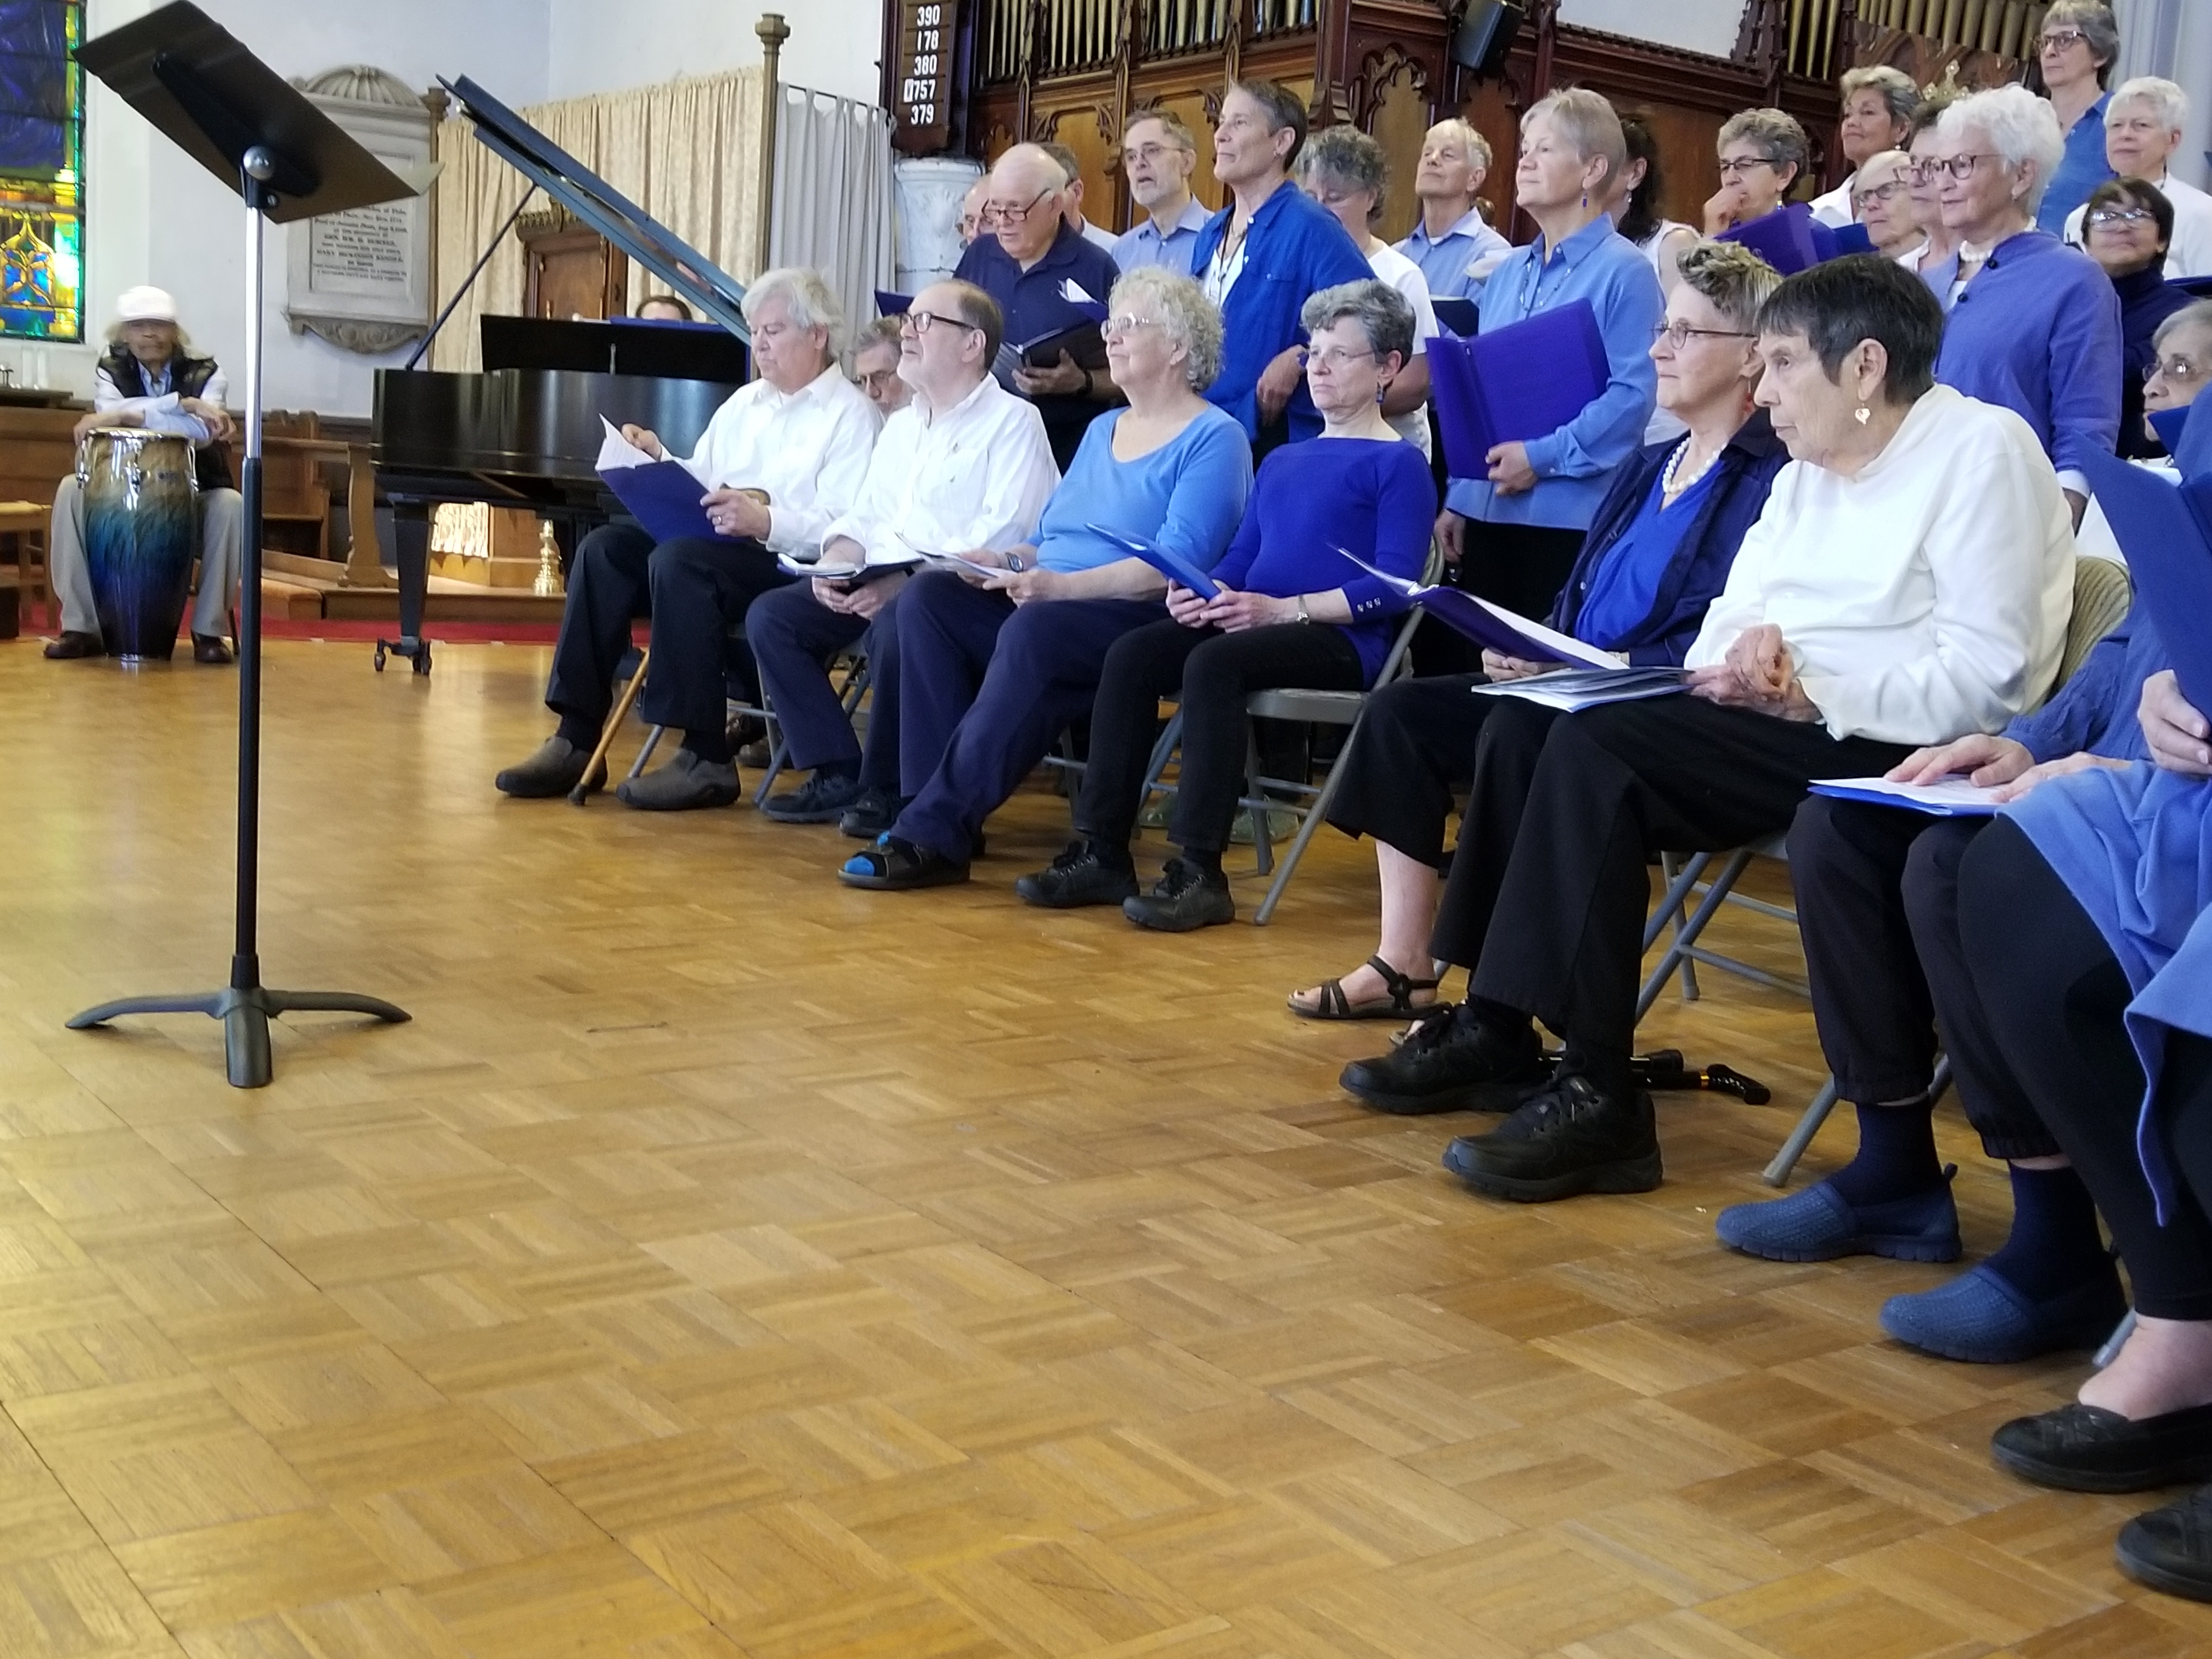 PACE participants practice for the Jubilee Chorus